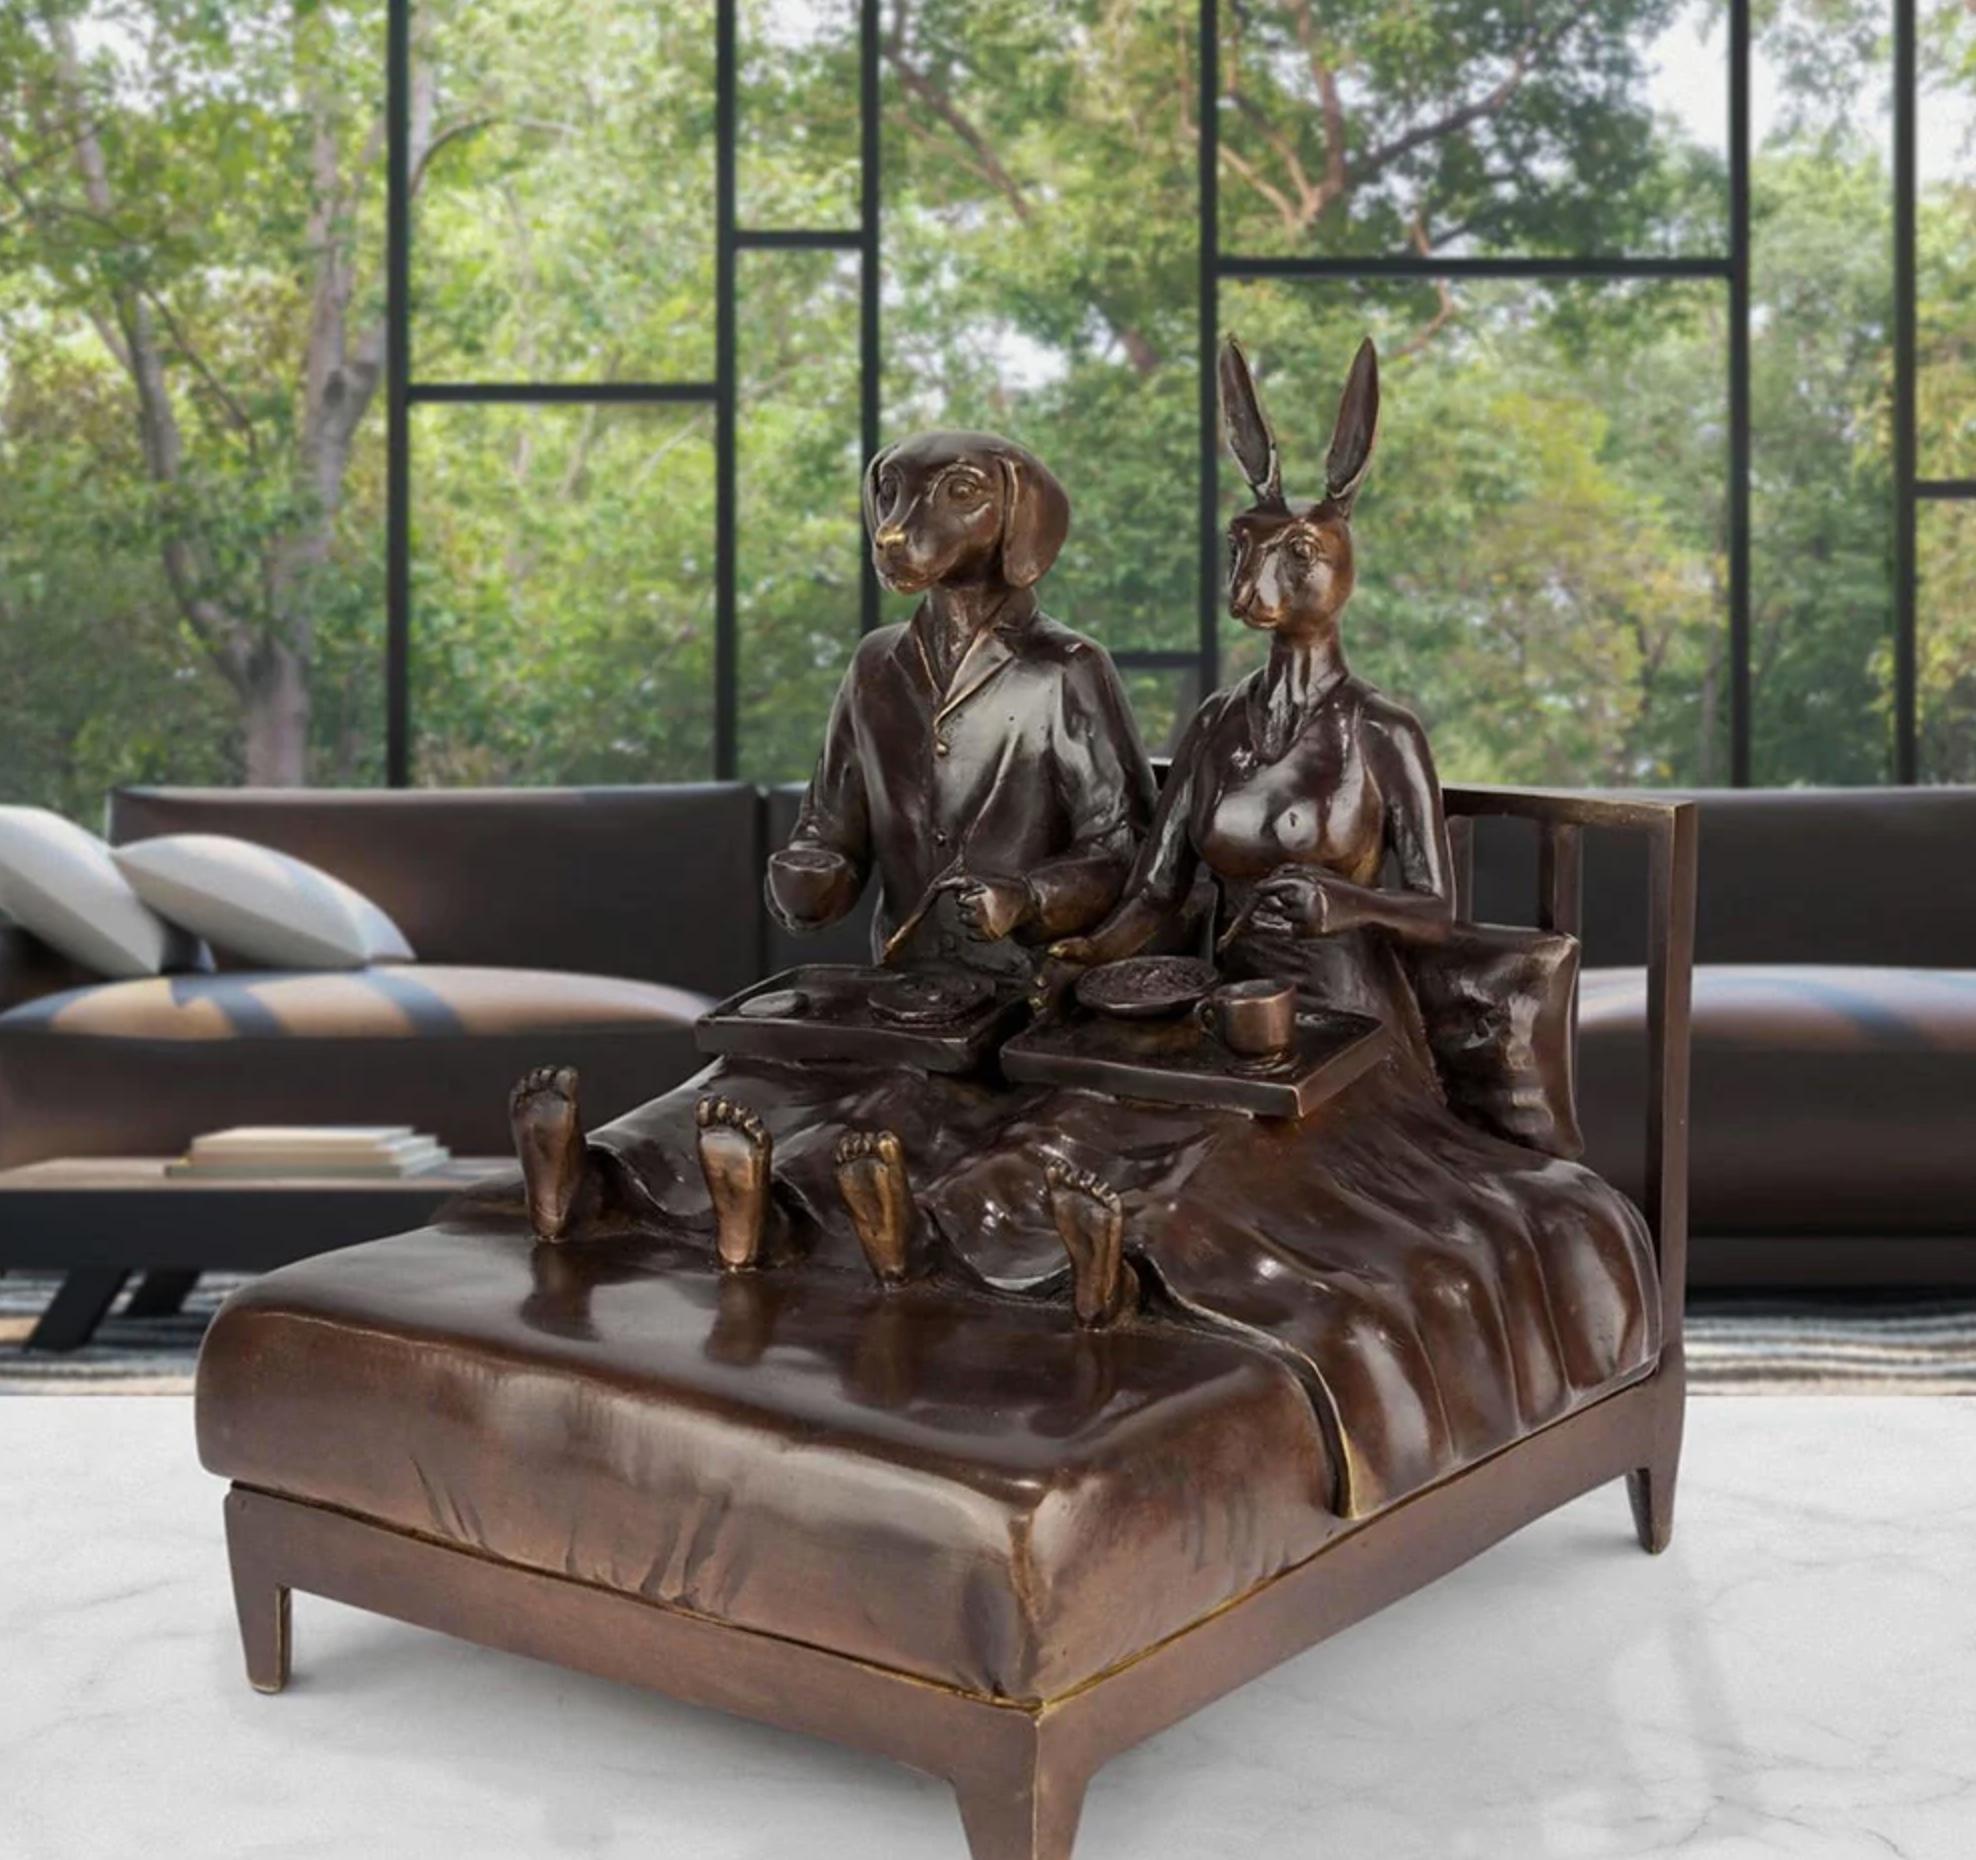 Gillie and Marc Schattner Figurative Sculpture - Authentic Bronze They loved breakfast in bed... Sculpture by Gillie and Marc